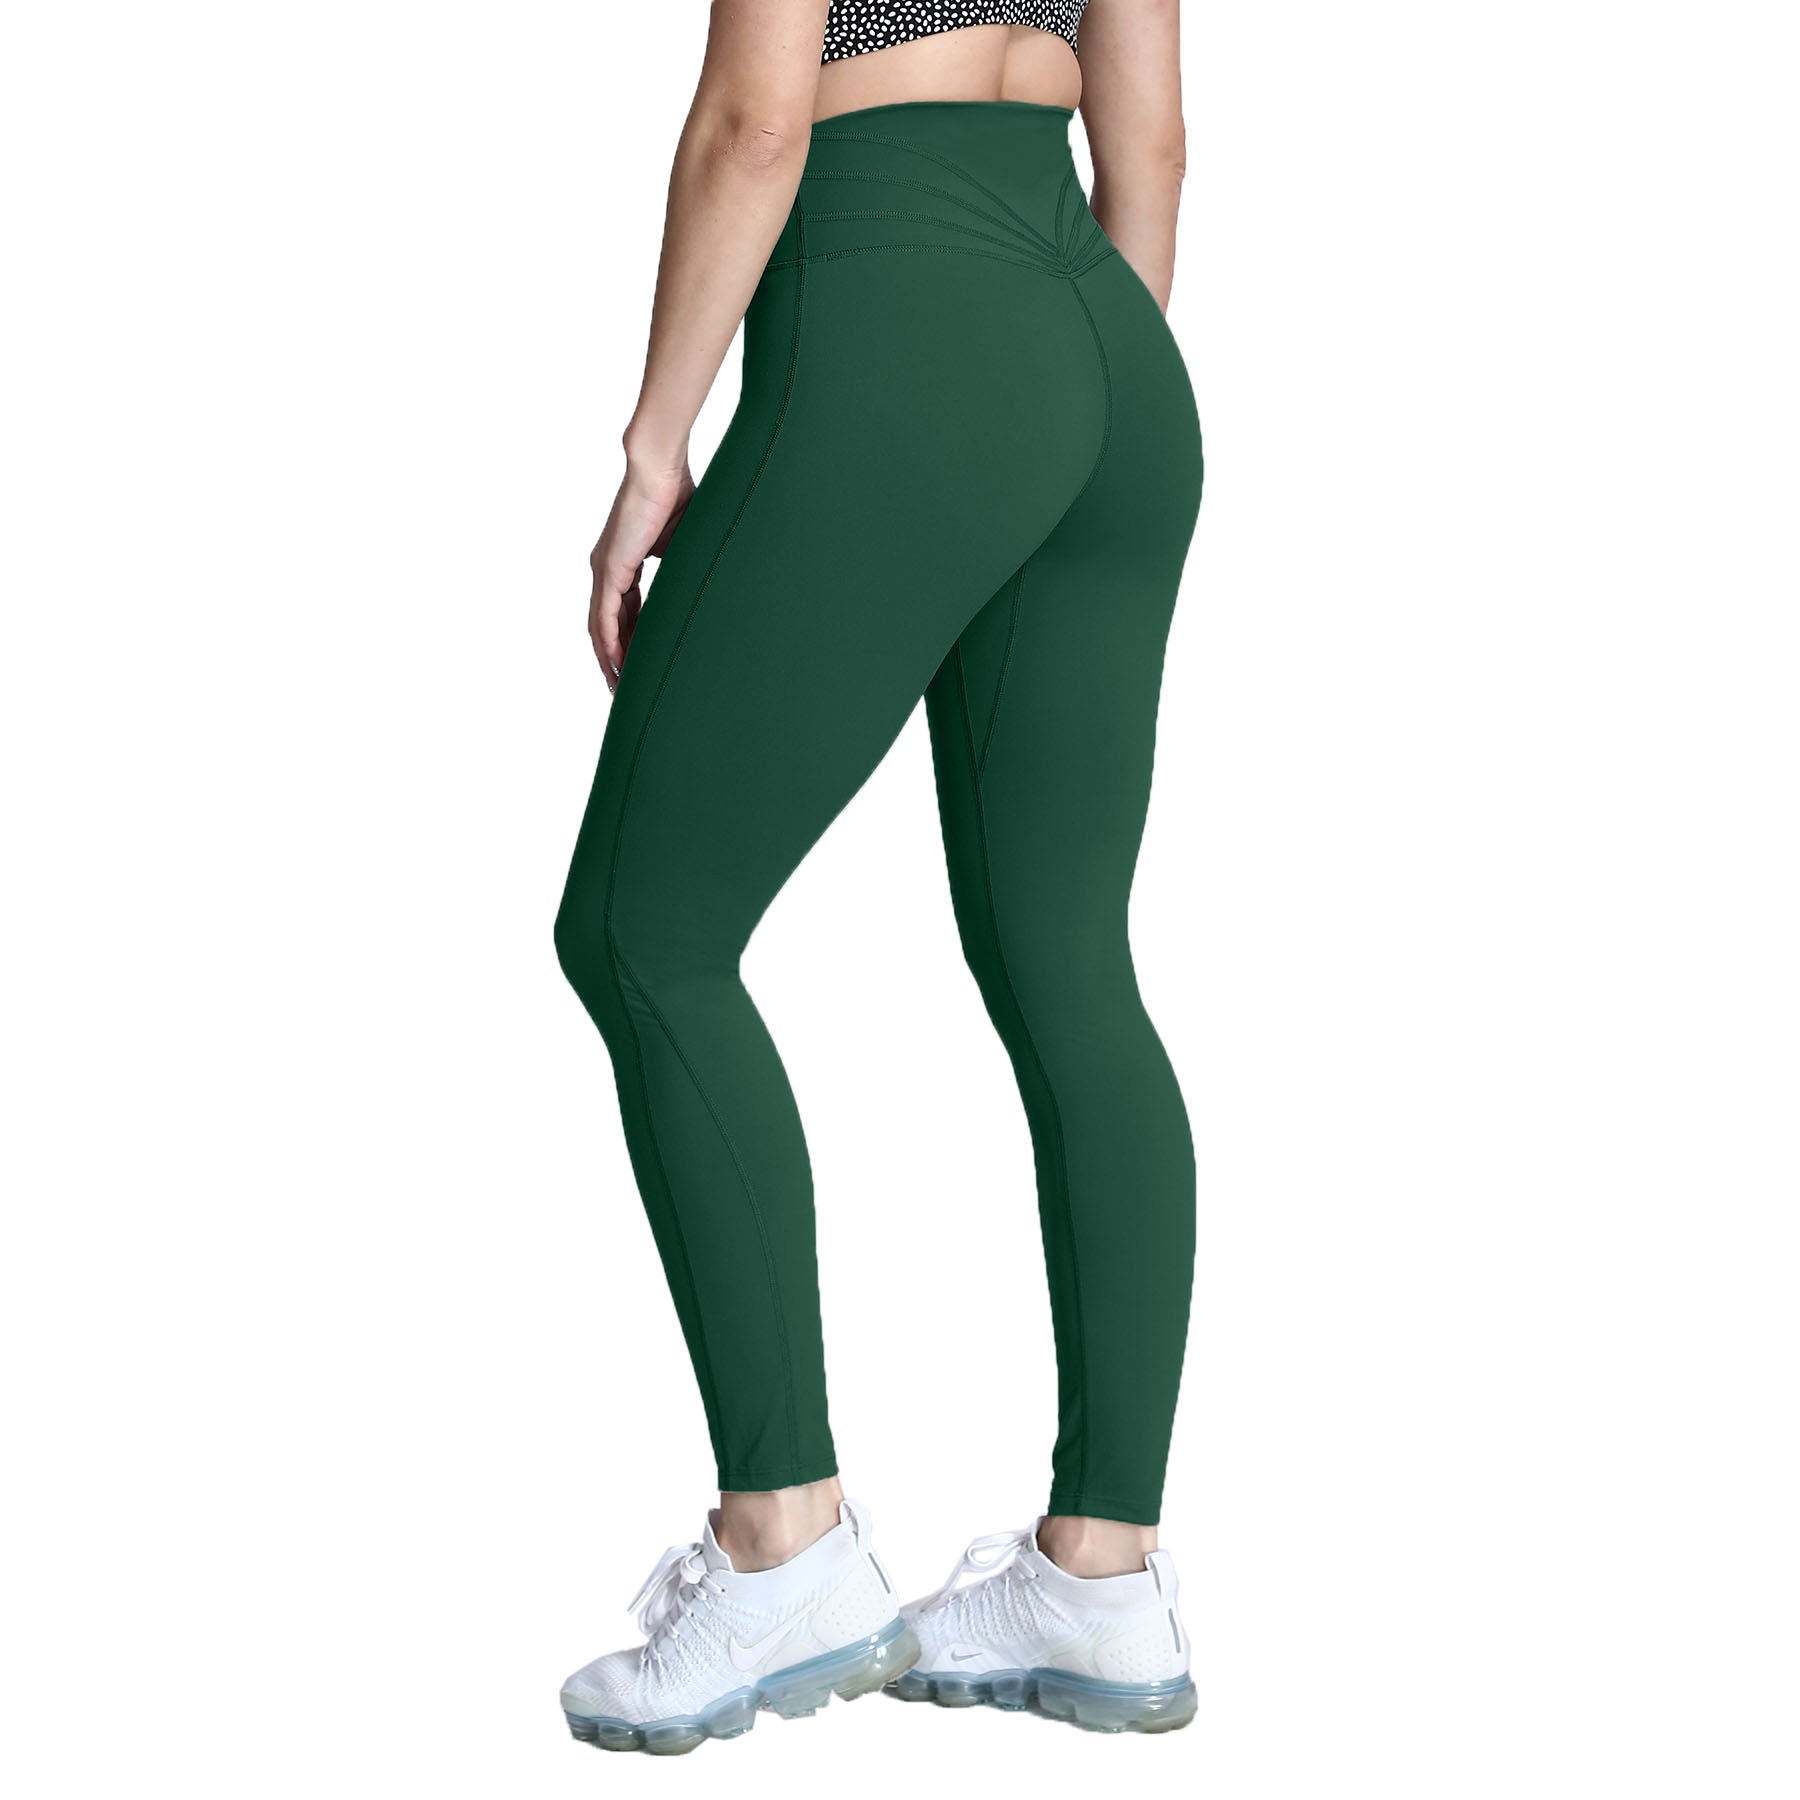 Aoxjox Flare Leggings for Women Trinity Tummy Control High Waisted